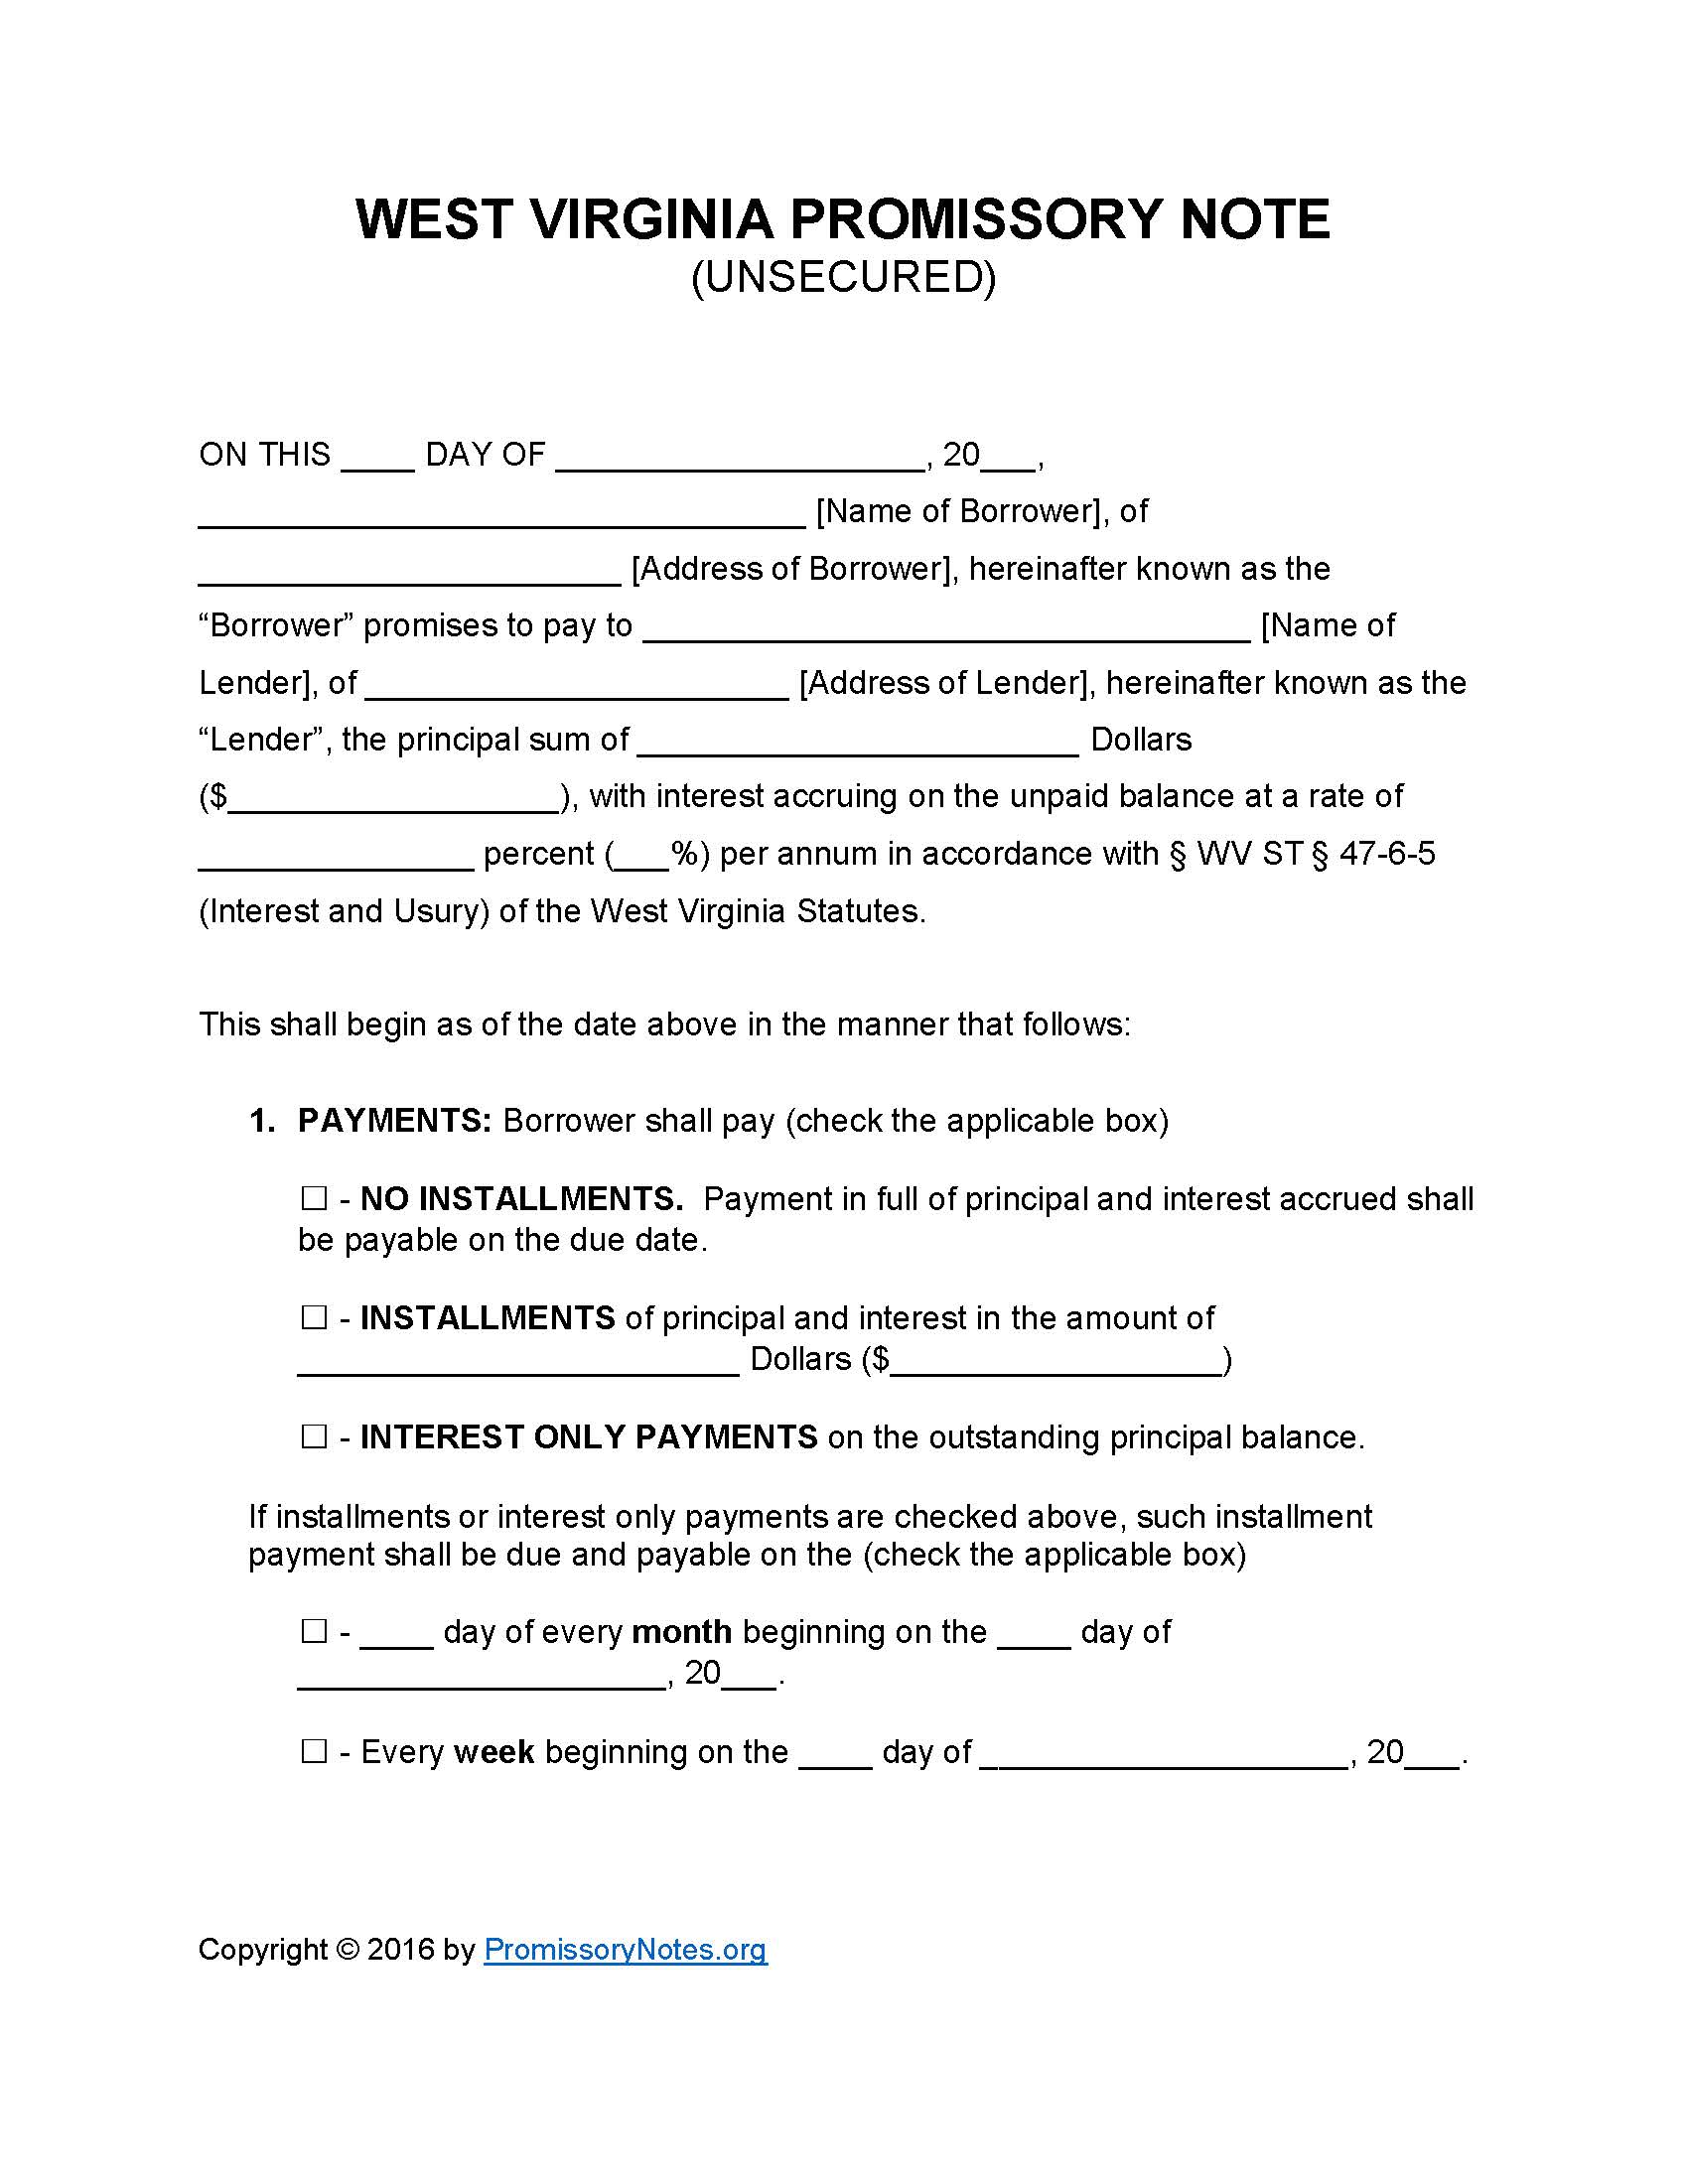 West Virginia Unsecured Promissory Note Template Promissory Notes